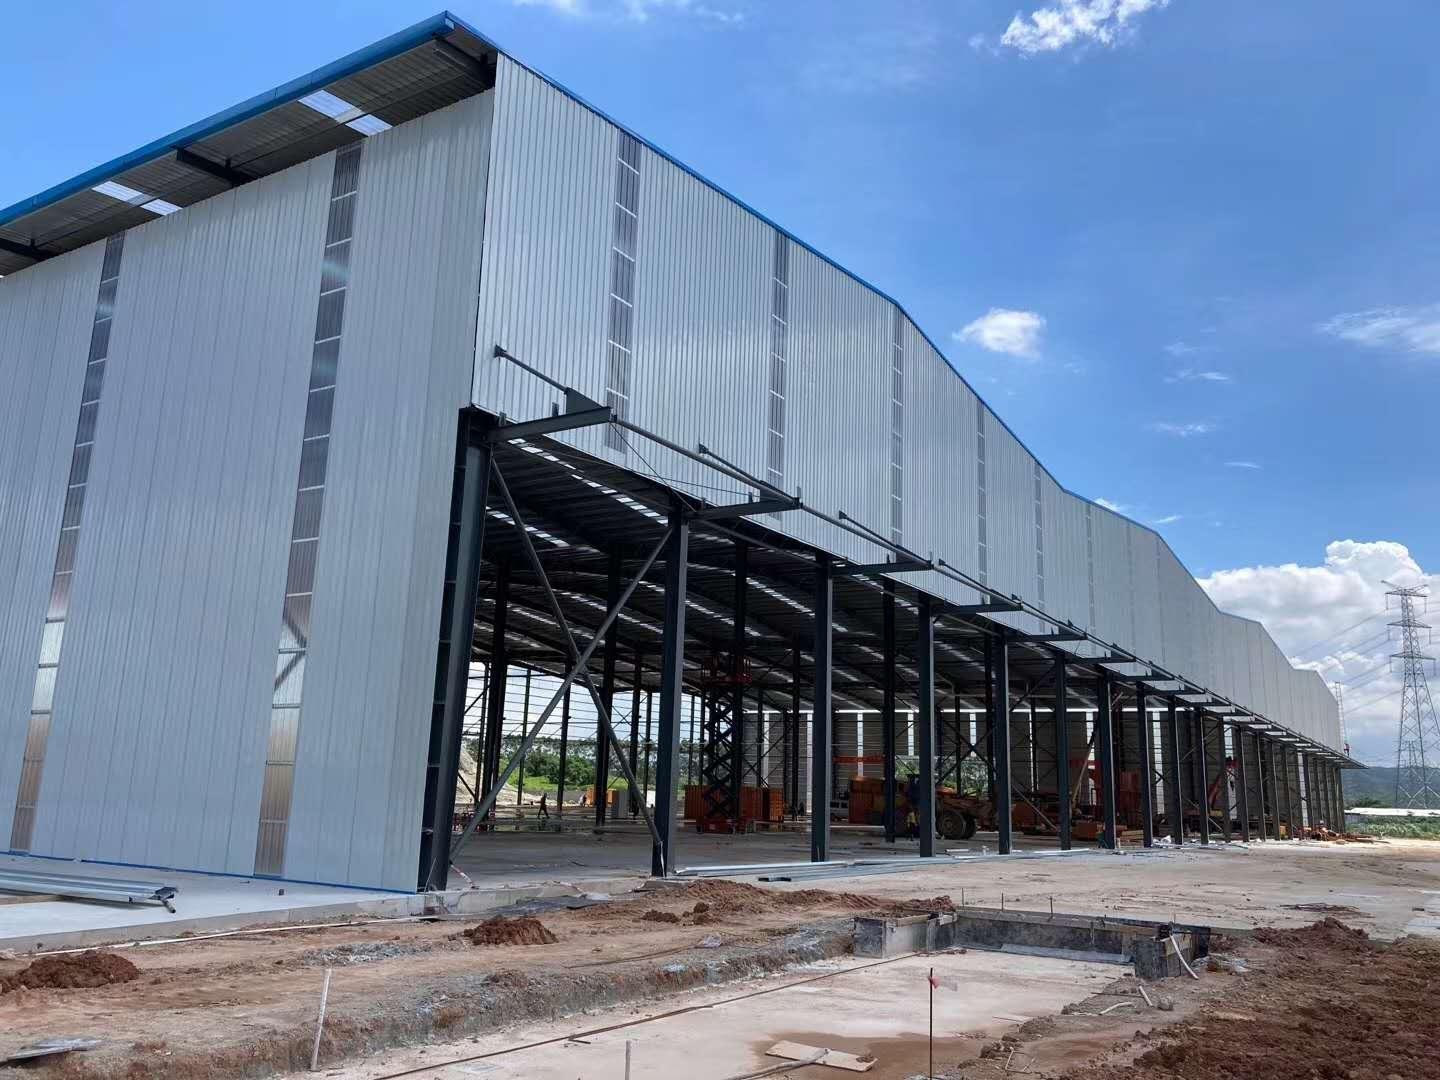 Steel Structure Warehouse 4